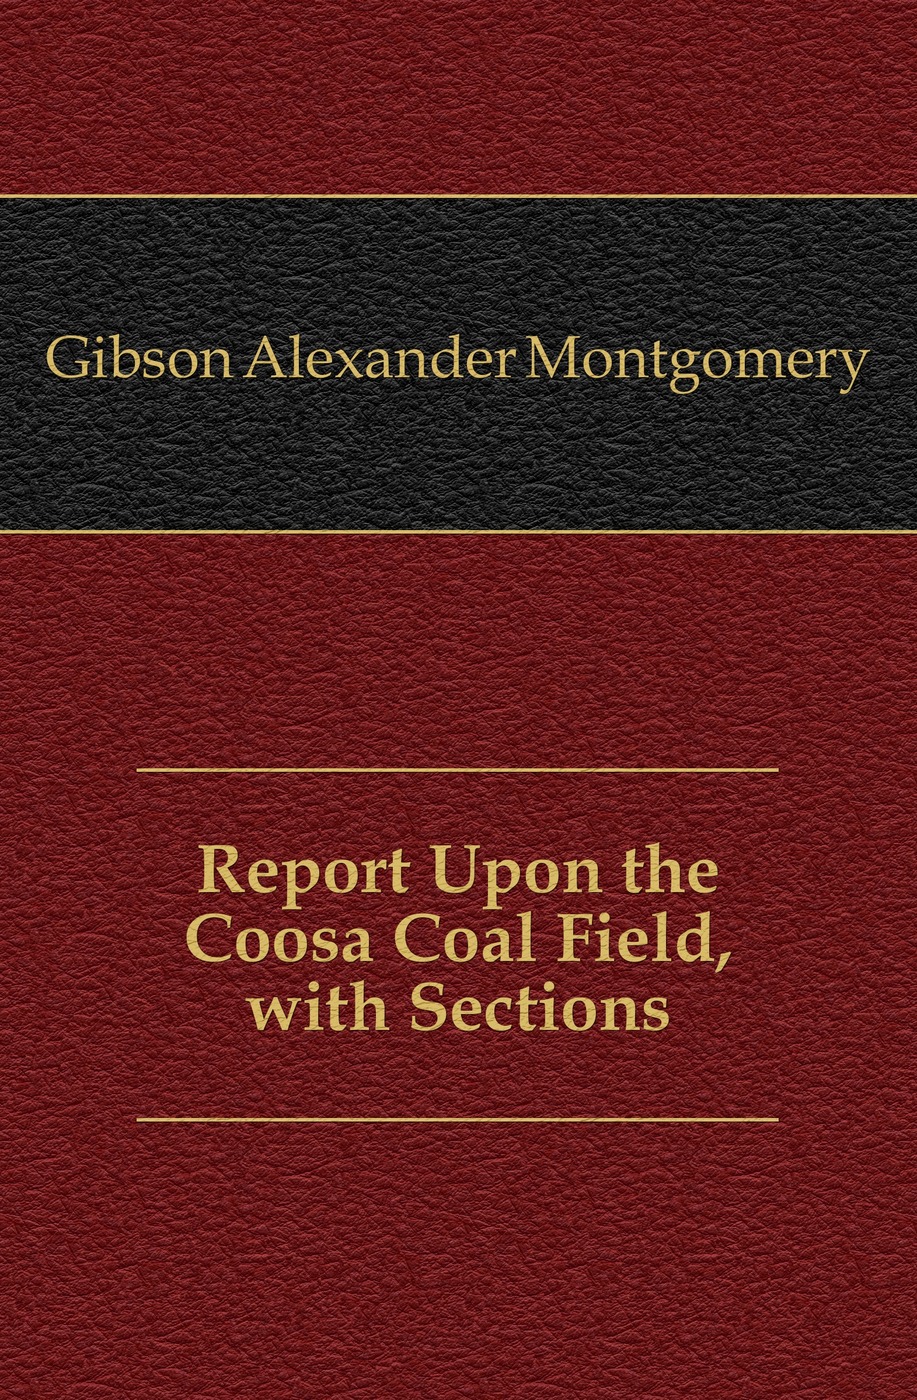 Report Upon the Coosa Coal Field, with Sections